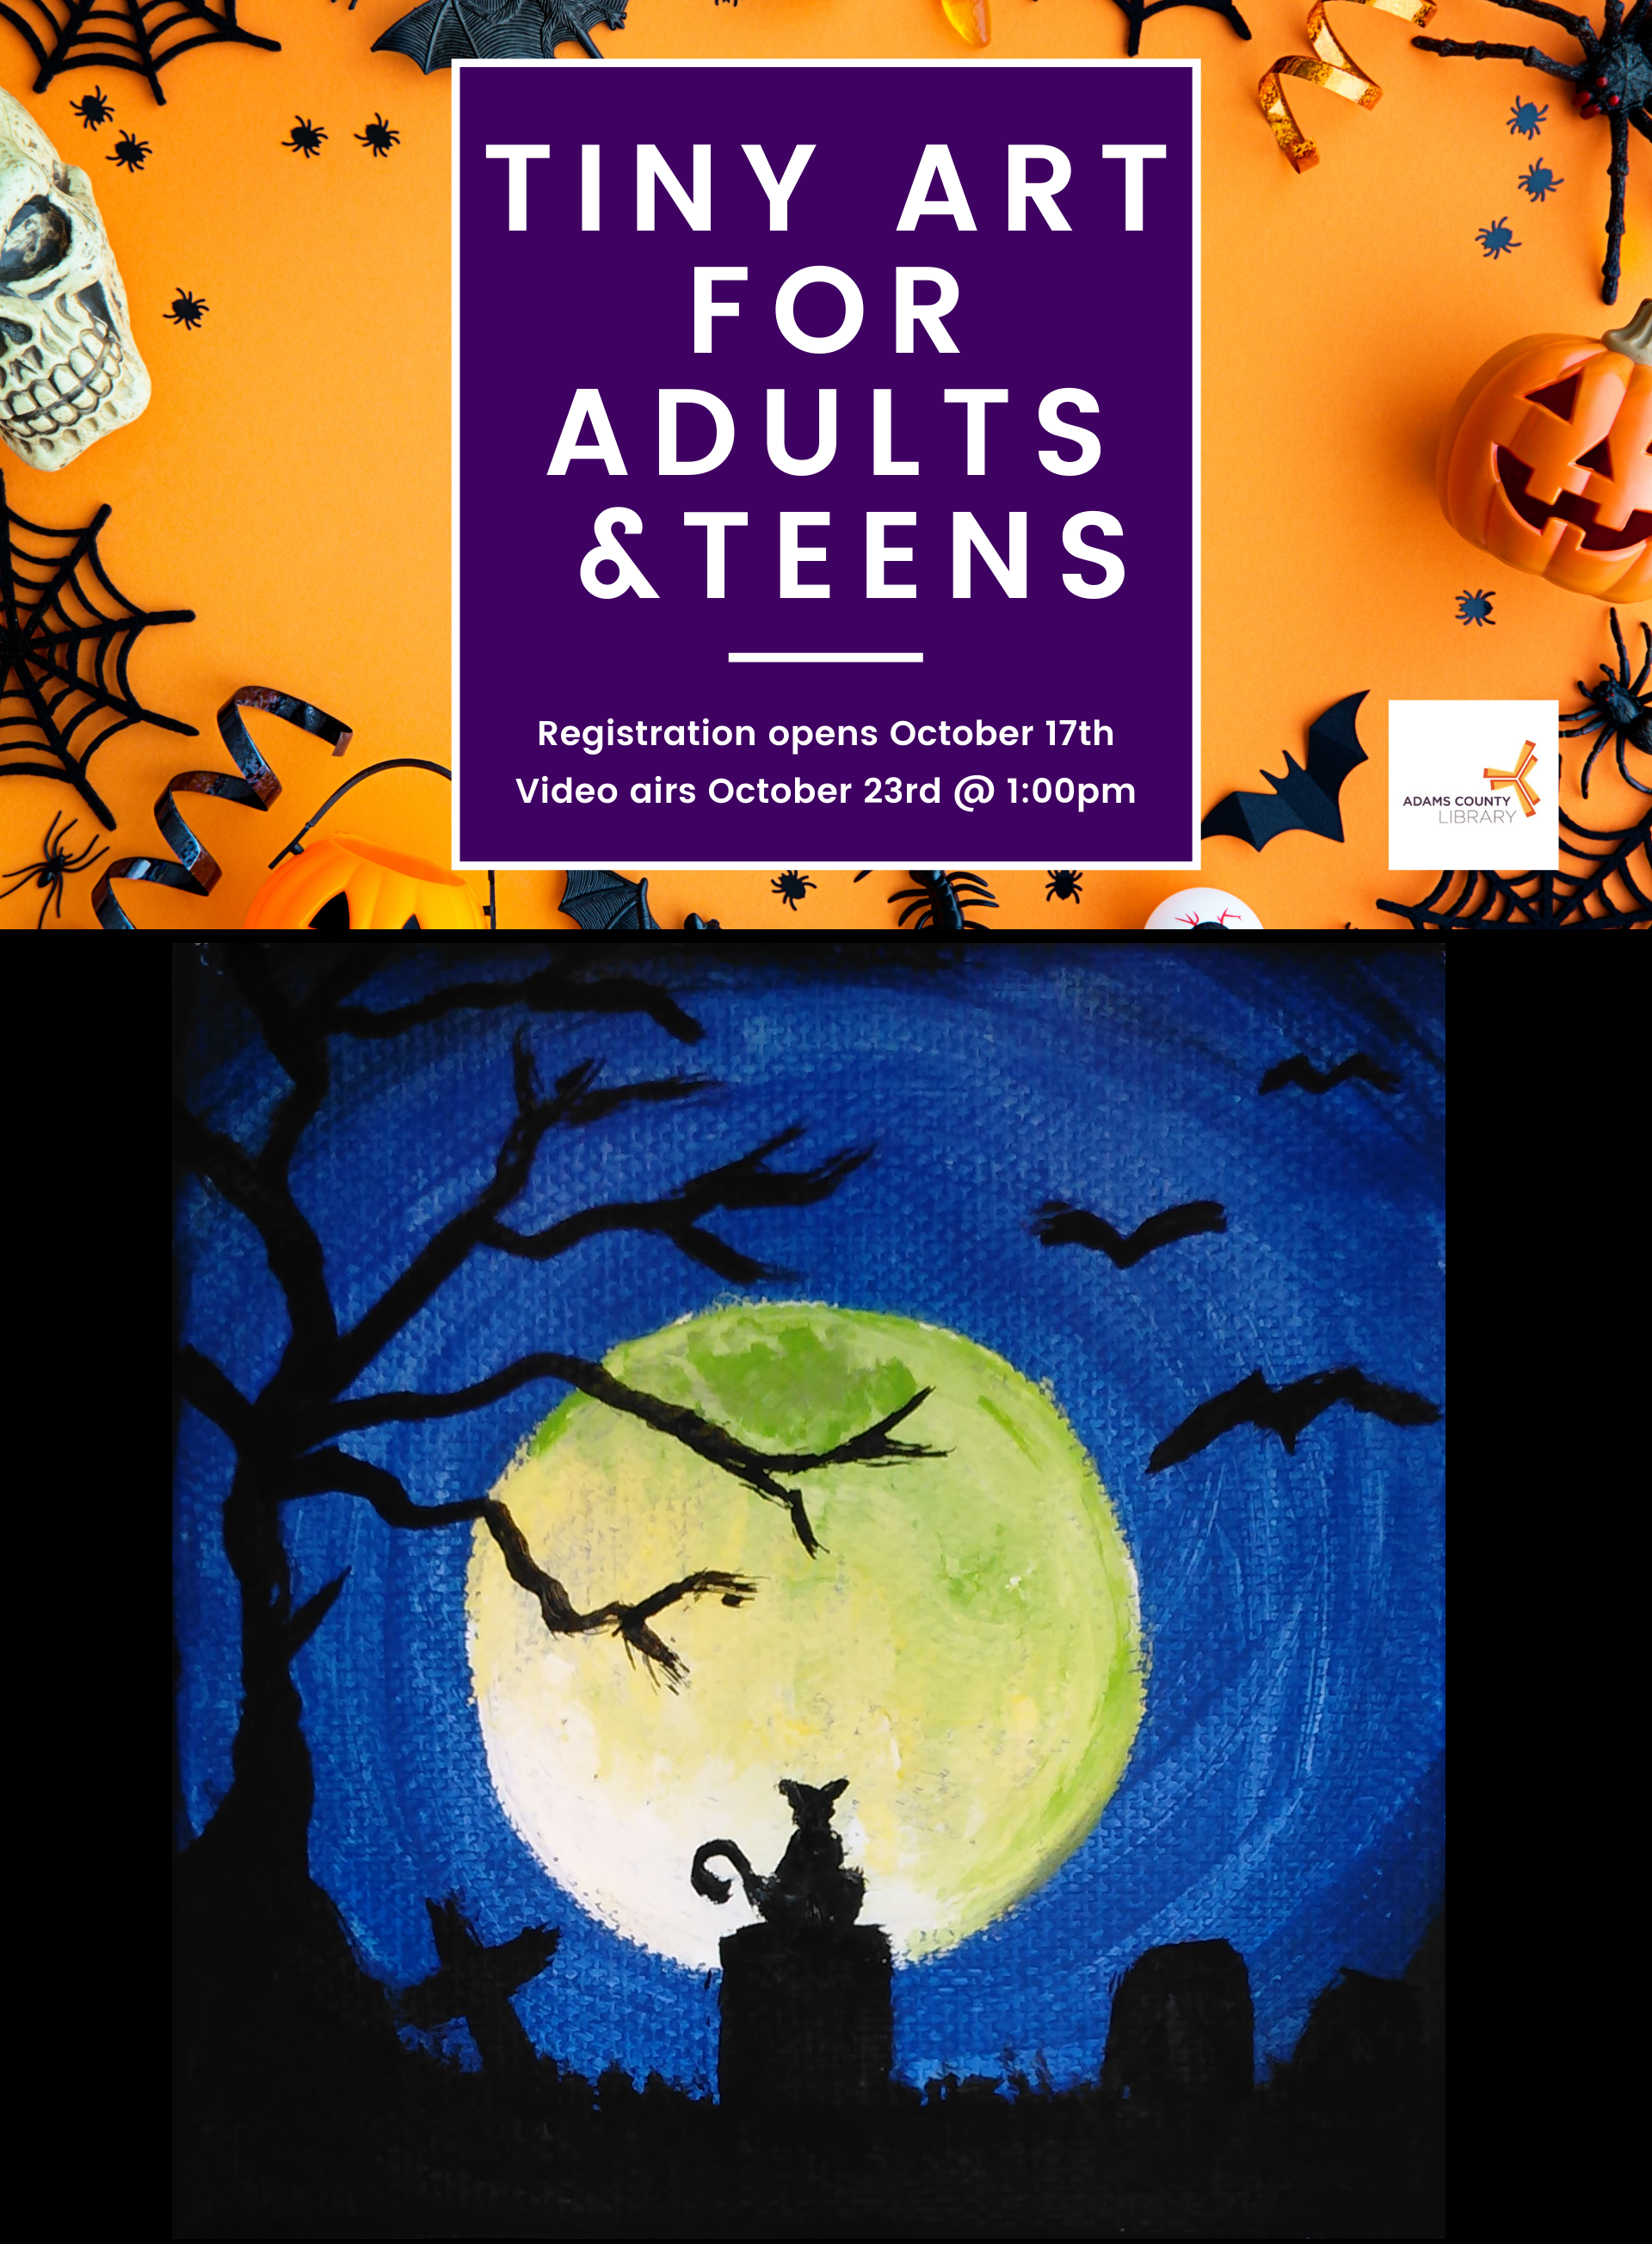 Tiny Art for Teens and Adults. Registration opens October 17th. Video airs October 23rd at 1pm.